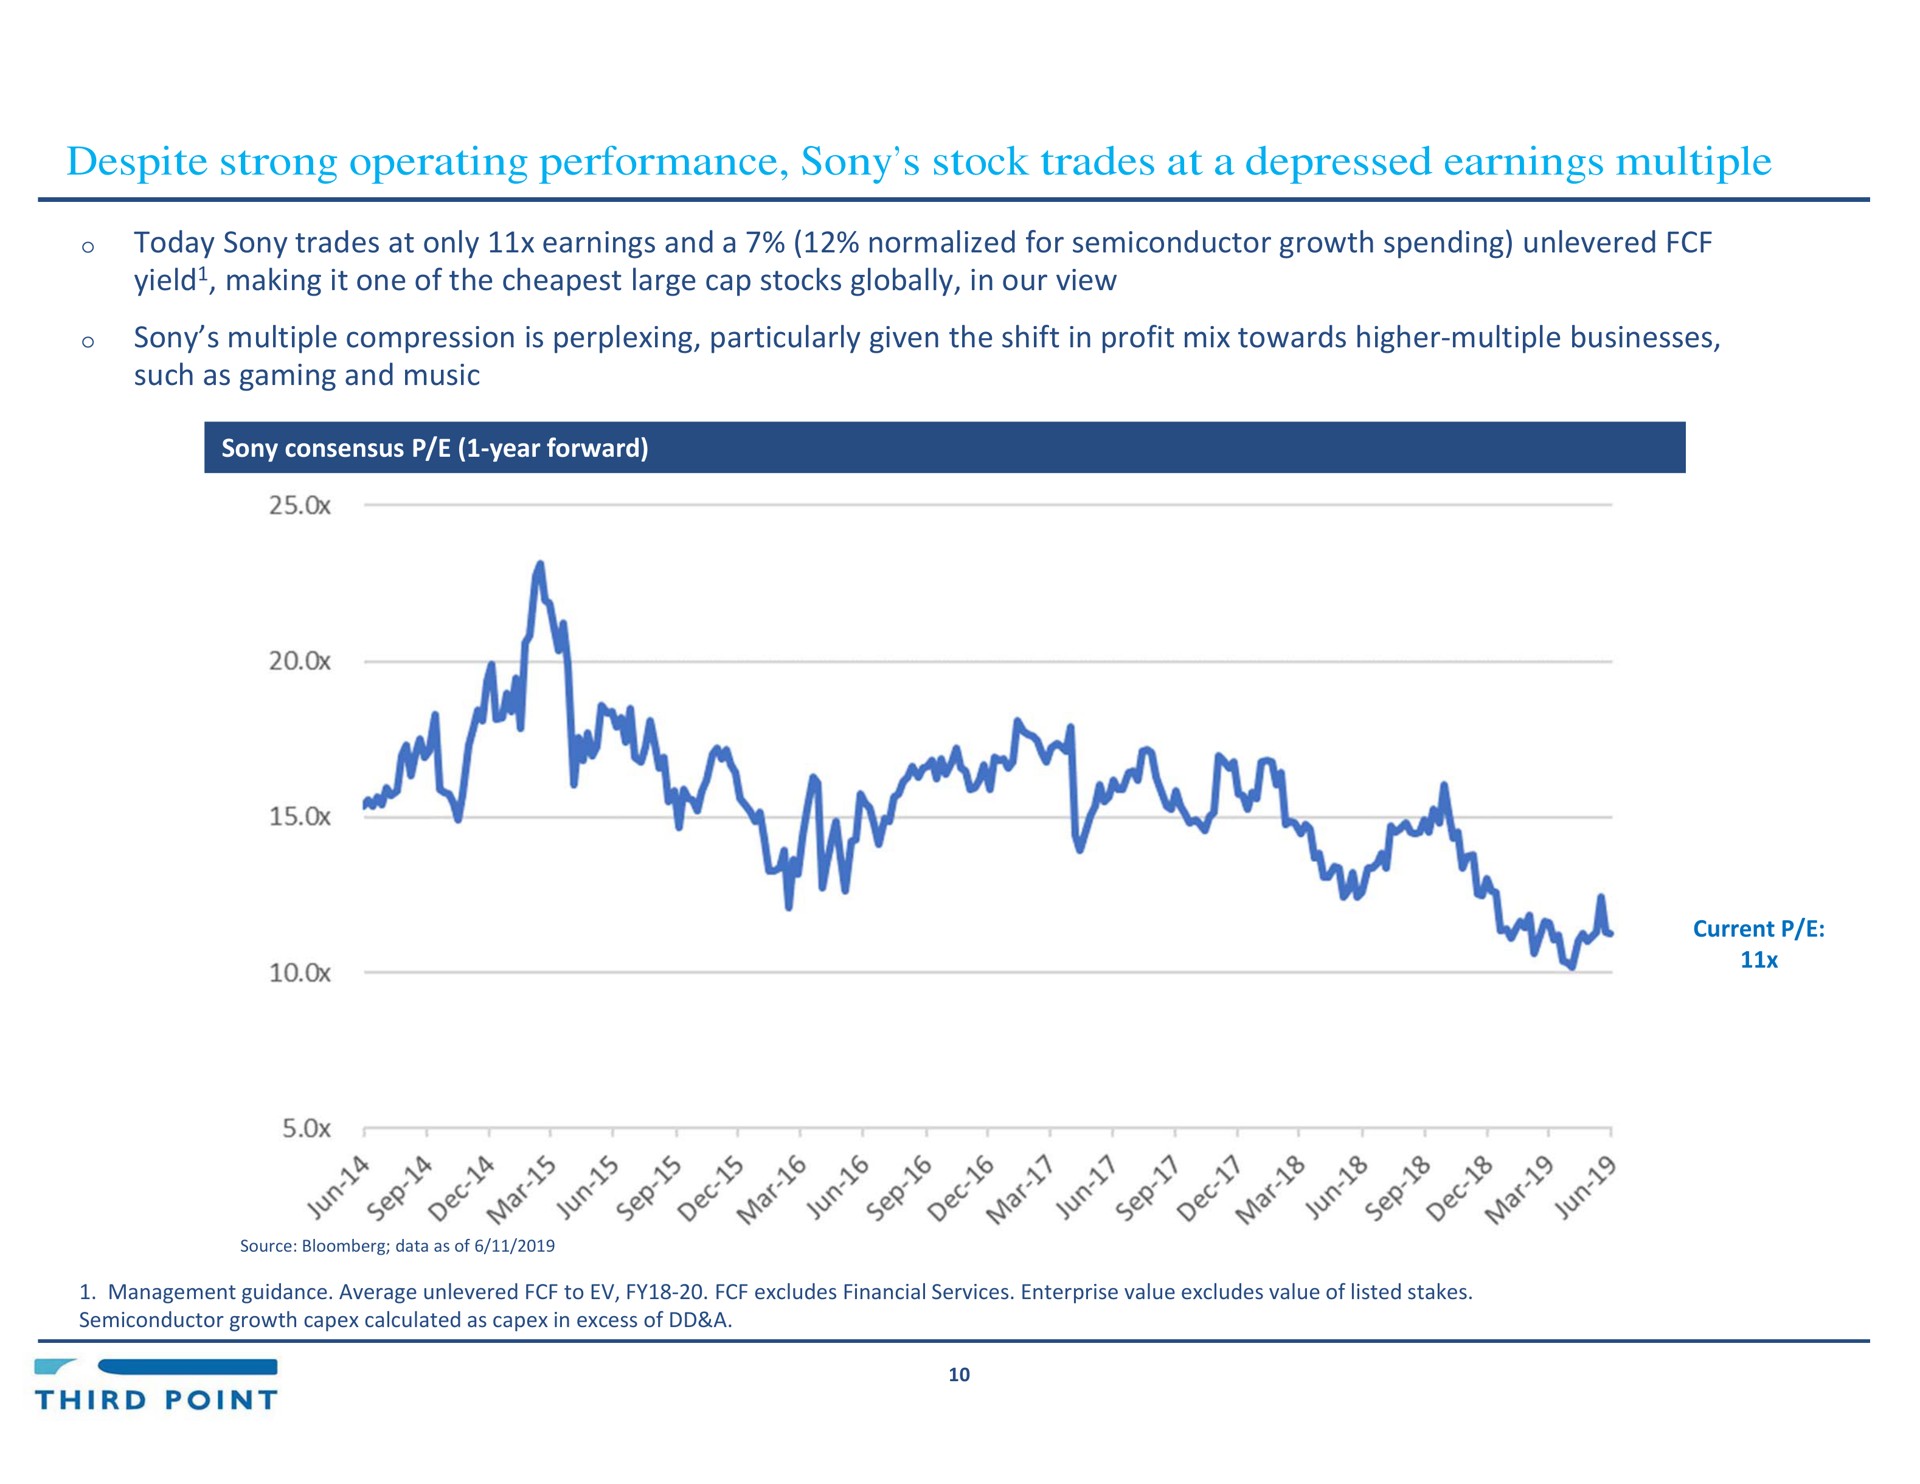 despite strong operating performance stock trades at a depressed earnings multiple today trades at only earnings and a normalized for semiconductor growth spending yield making it one of the large cap stocks globally in our view multiple compression is perplexing particularly given the shift in profit mix towards higher multiple businesses such as gaming and music go | Third Point Management